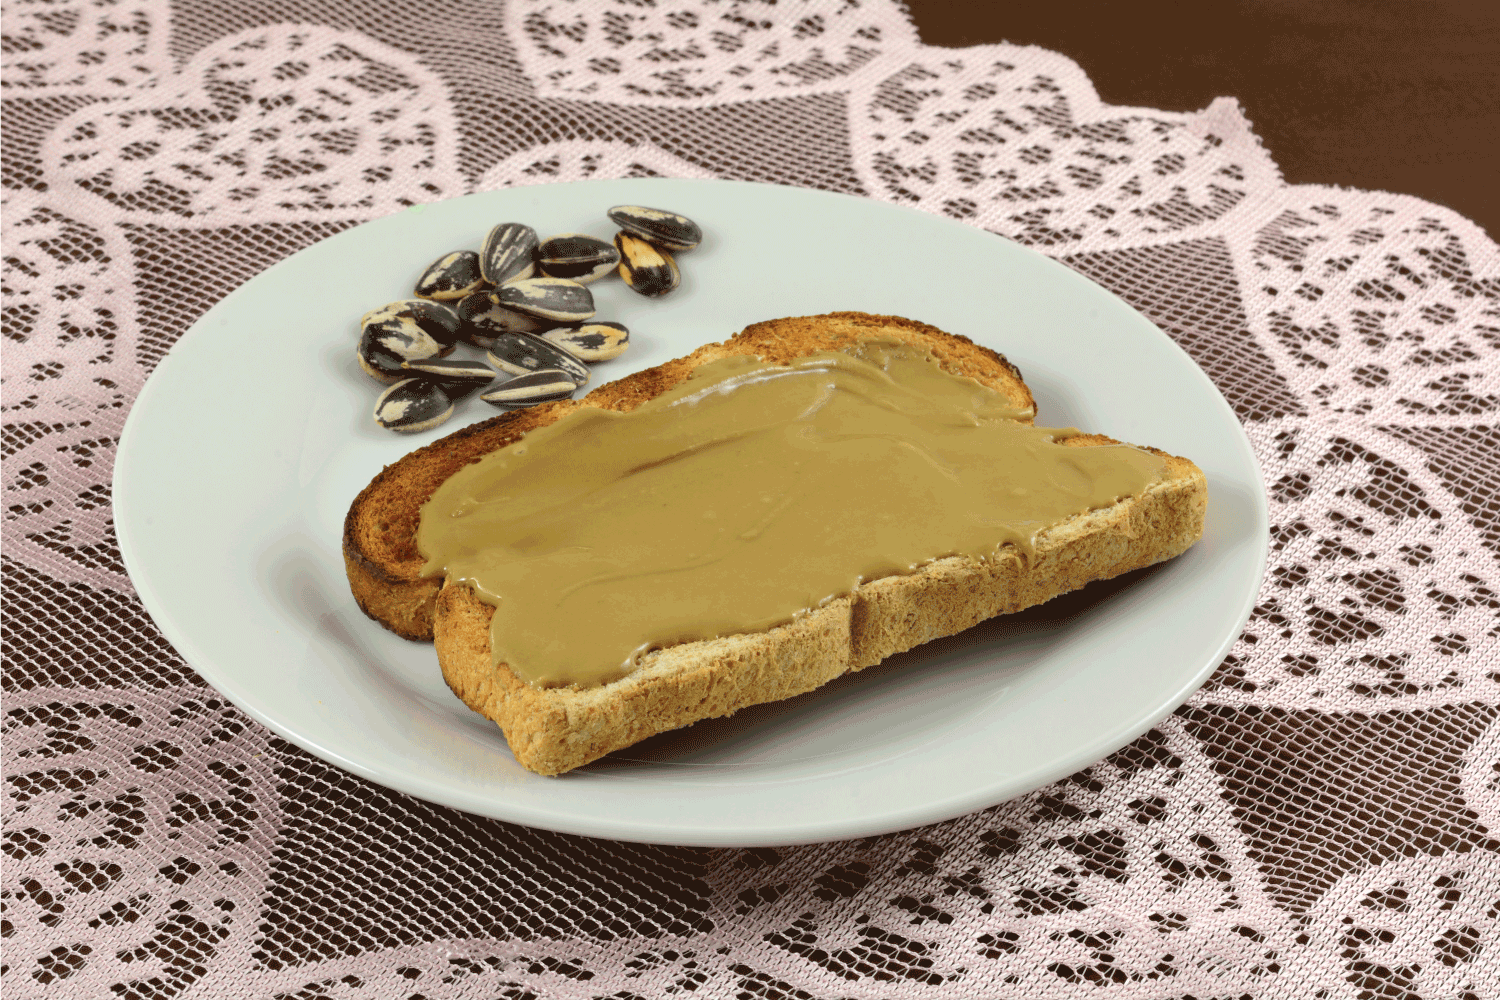 Sunflower butter on whole wheat toasted bread with sunflower seeds on white plate withe sunflower seeds on lace table runner